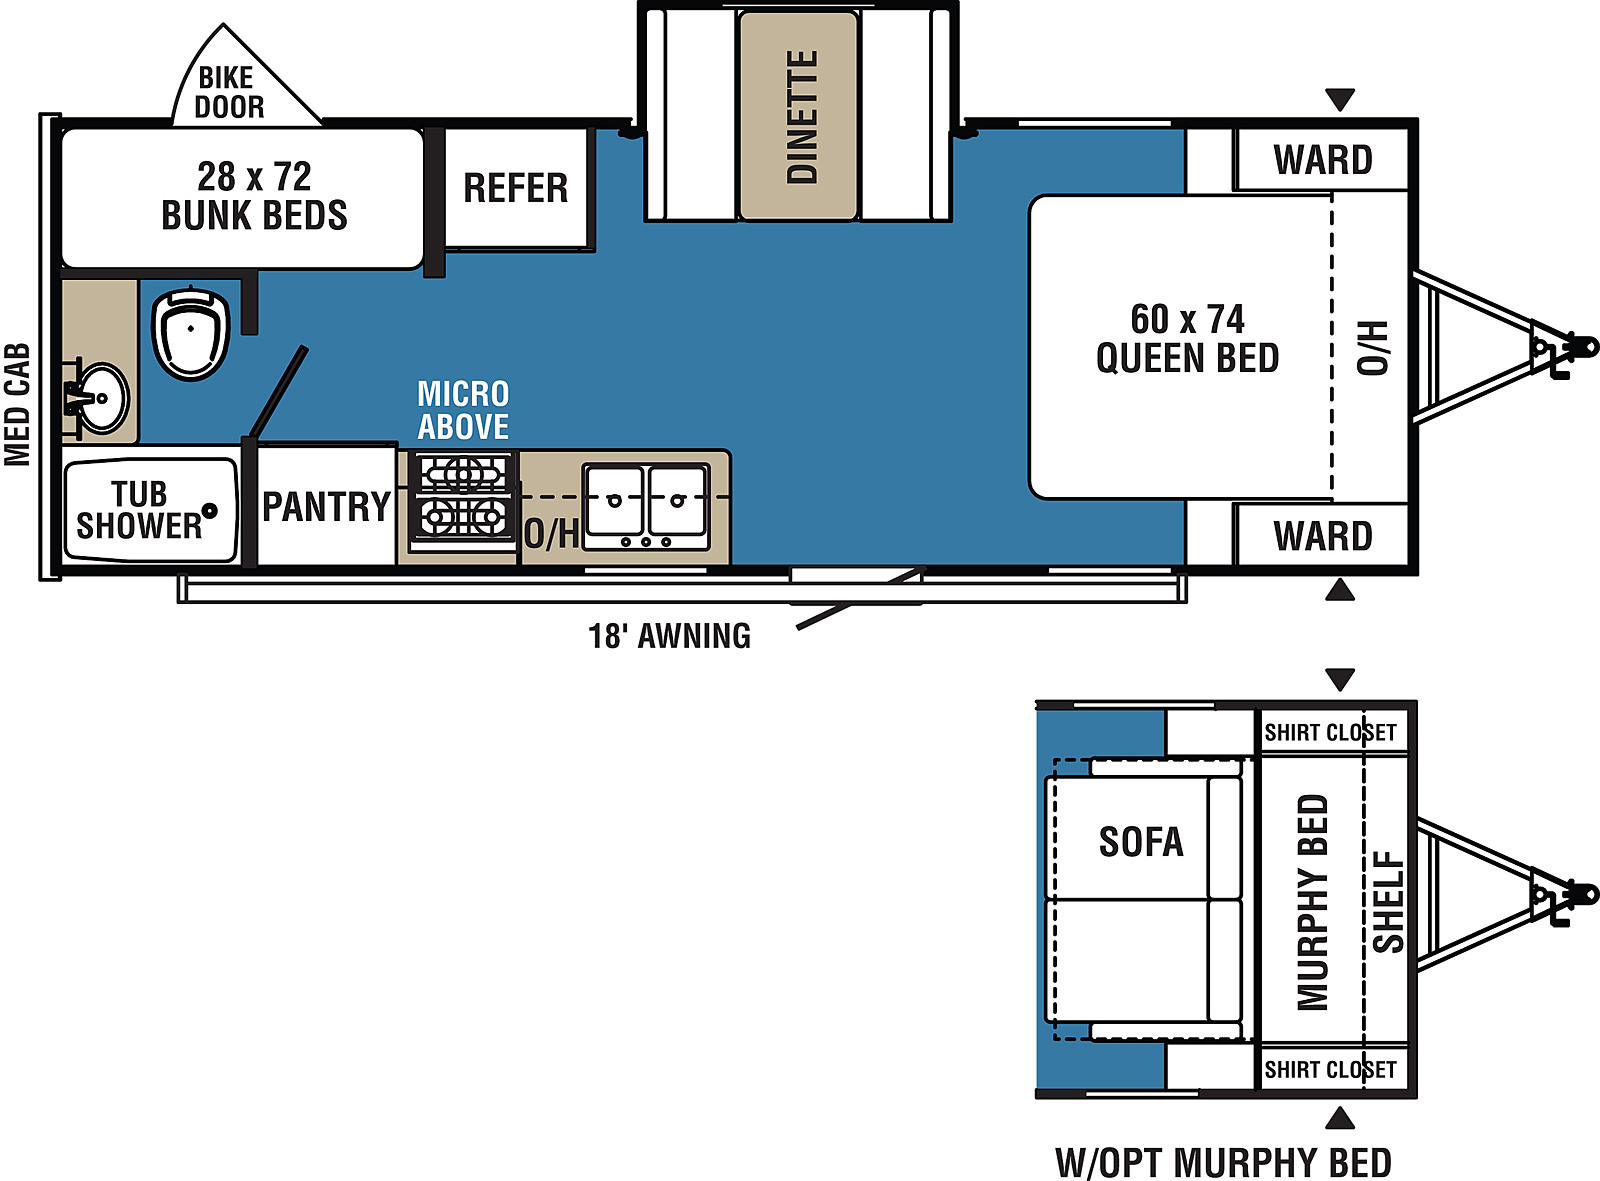 Clipper Ultra-Lite 21BHS floorplan. The 21BHS has one slide out and one entry door.